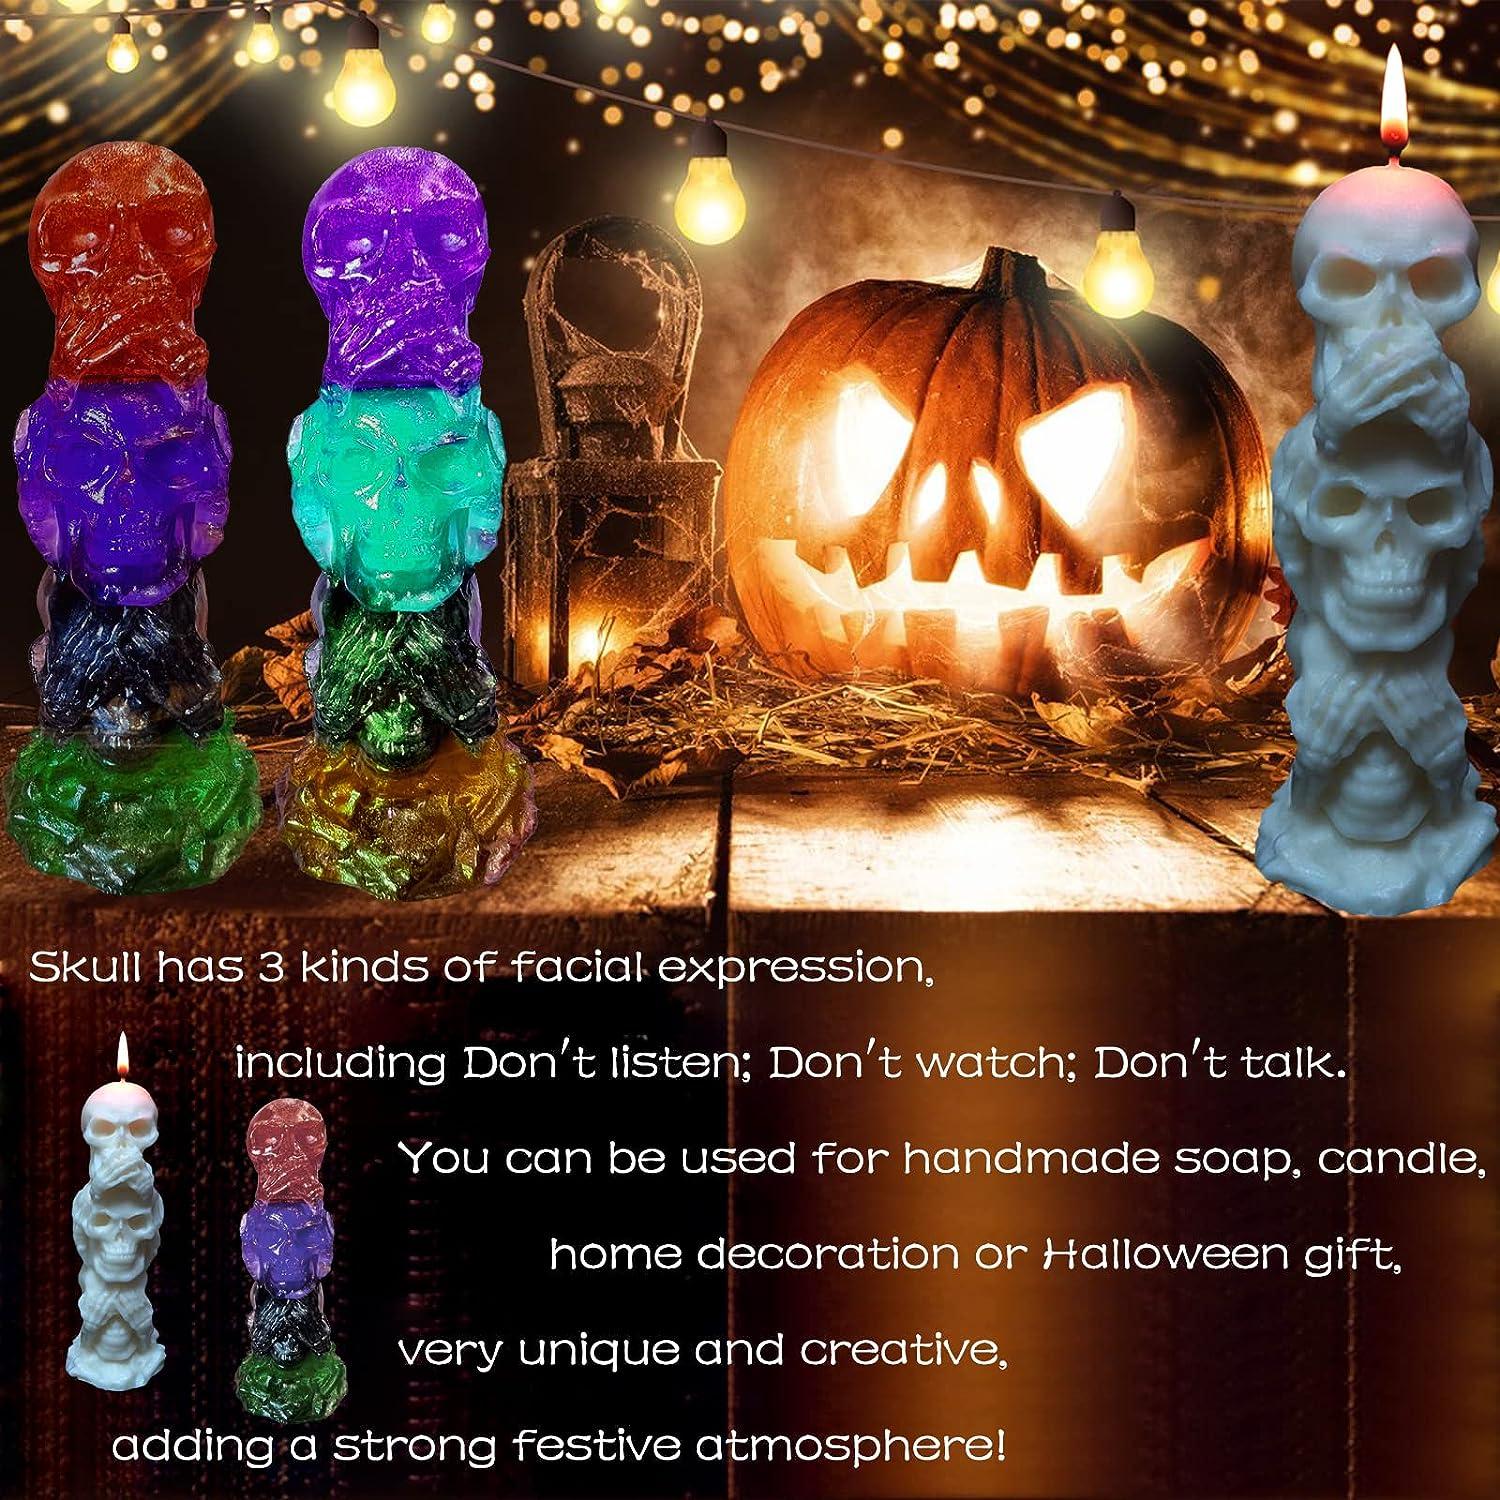 1 Pieces Shape Candle Molds Halloween Cute 3D Aromatherapy Silicone Mold  Handmade Diy Crafts For Wax Making Resin Casting Soap Candy Gifts Supplies